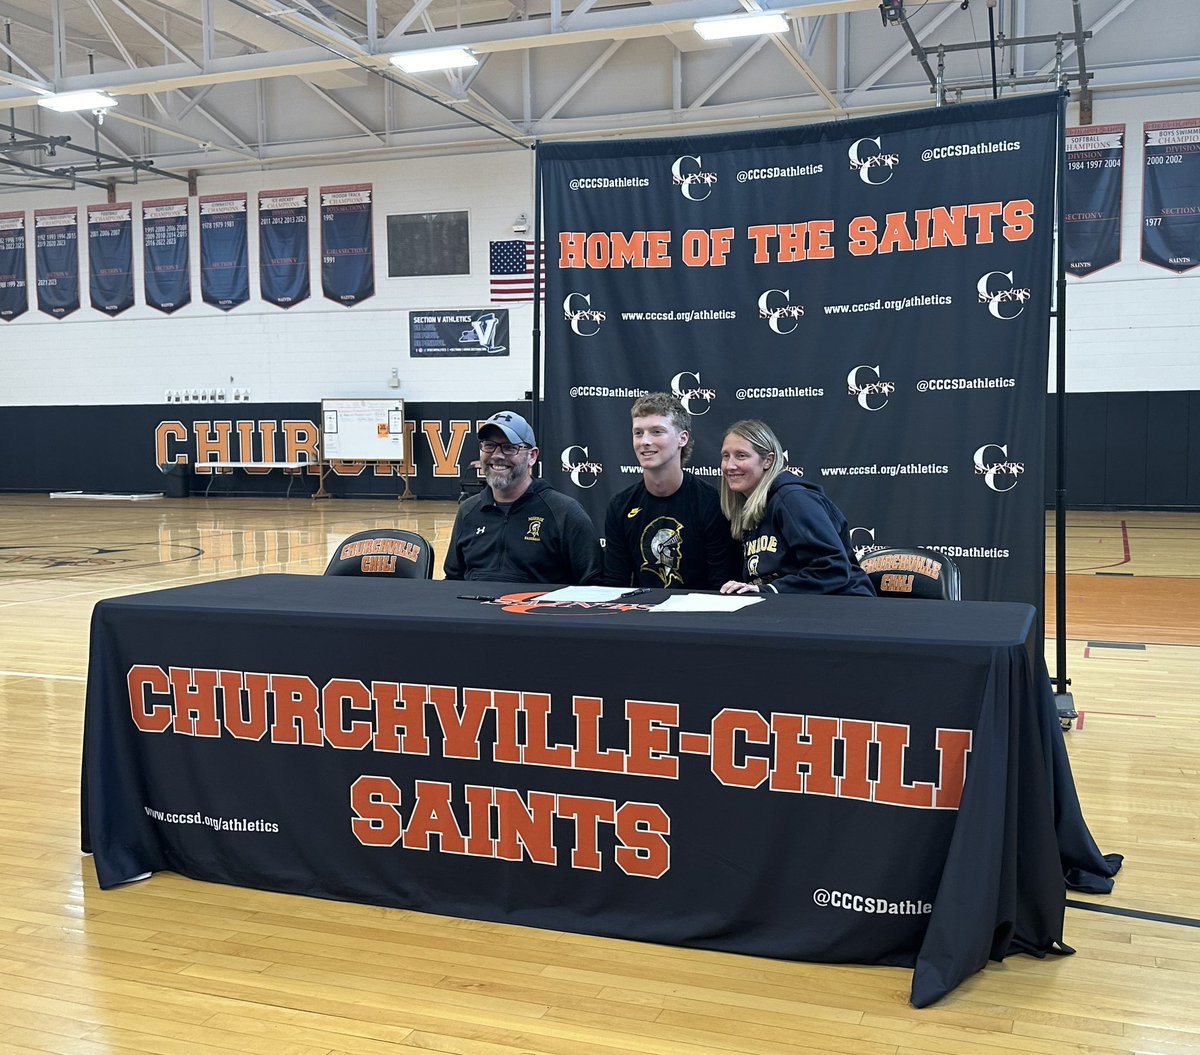 Congratulations to Evan Putney who has committed to play baseball at Monroe Community College. @cccsdbaseball